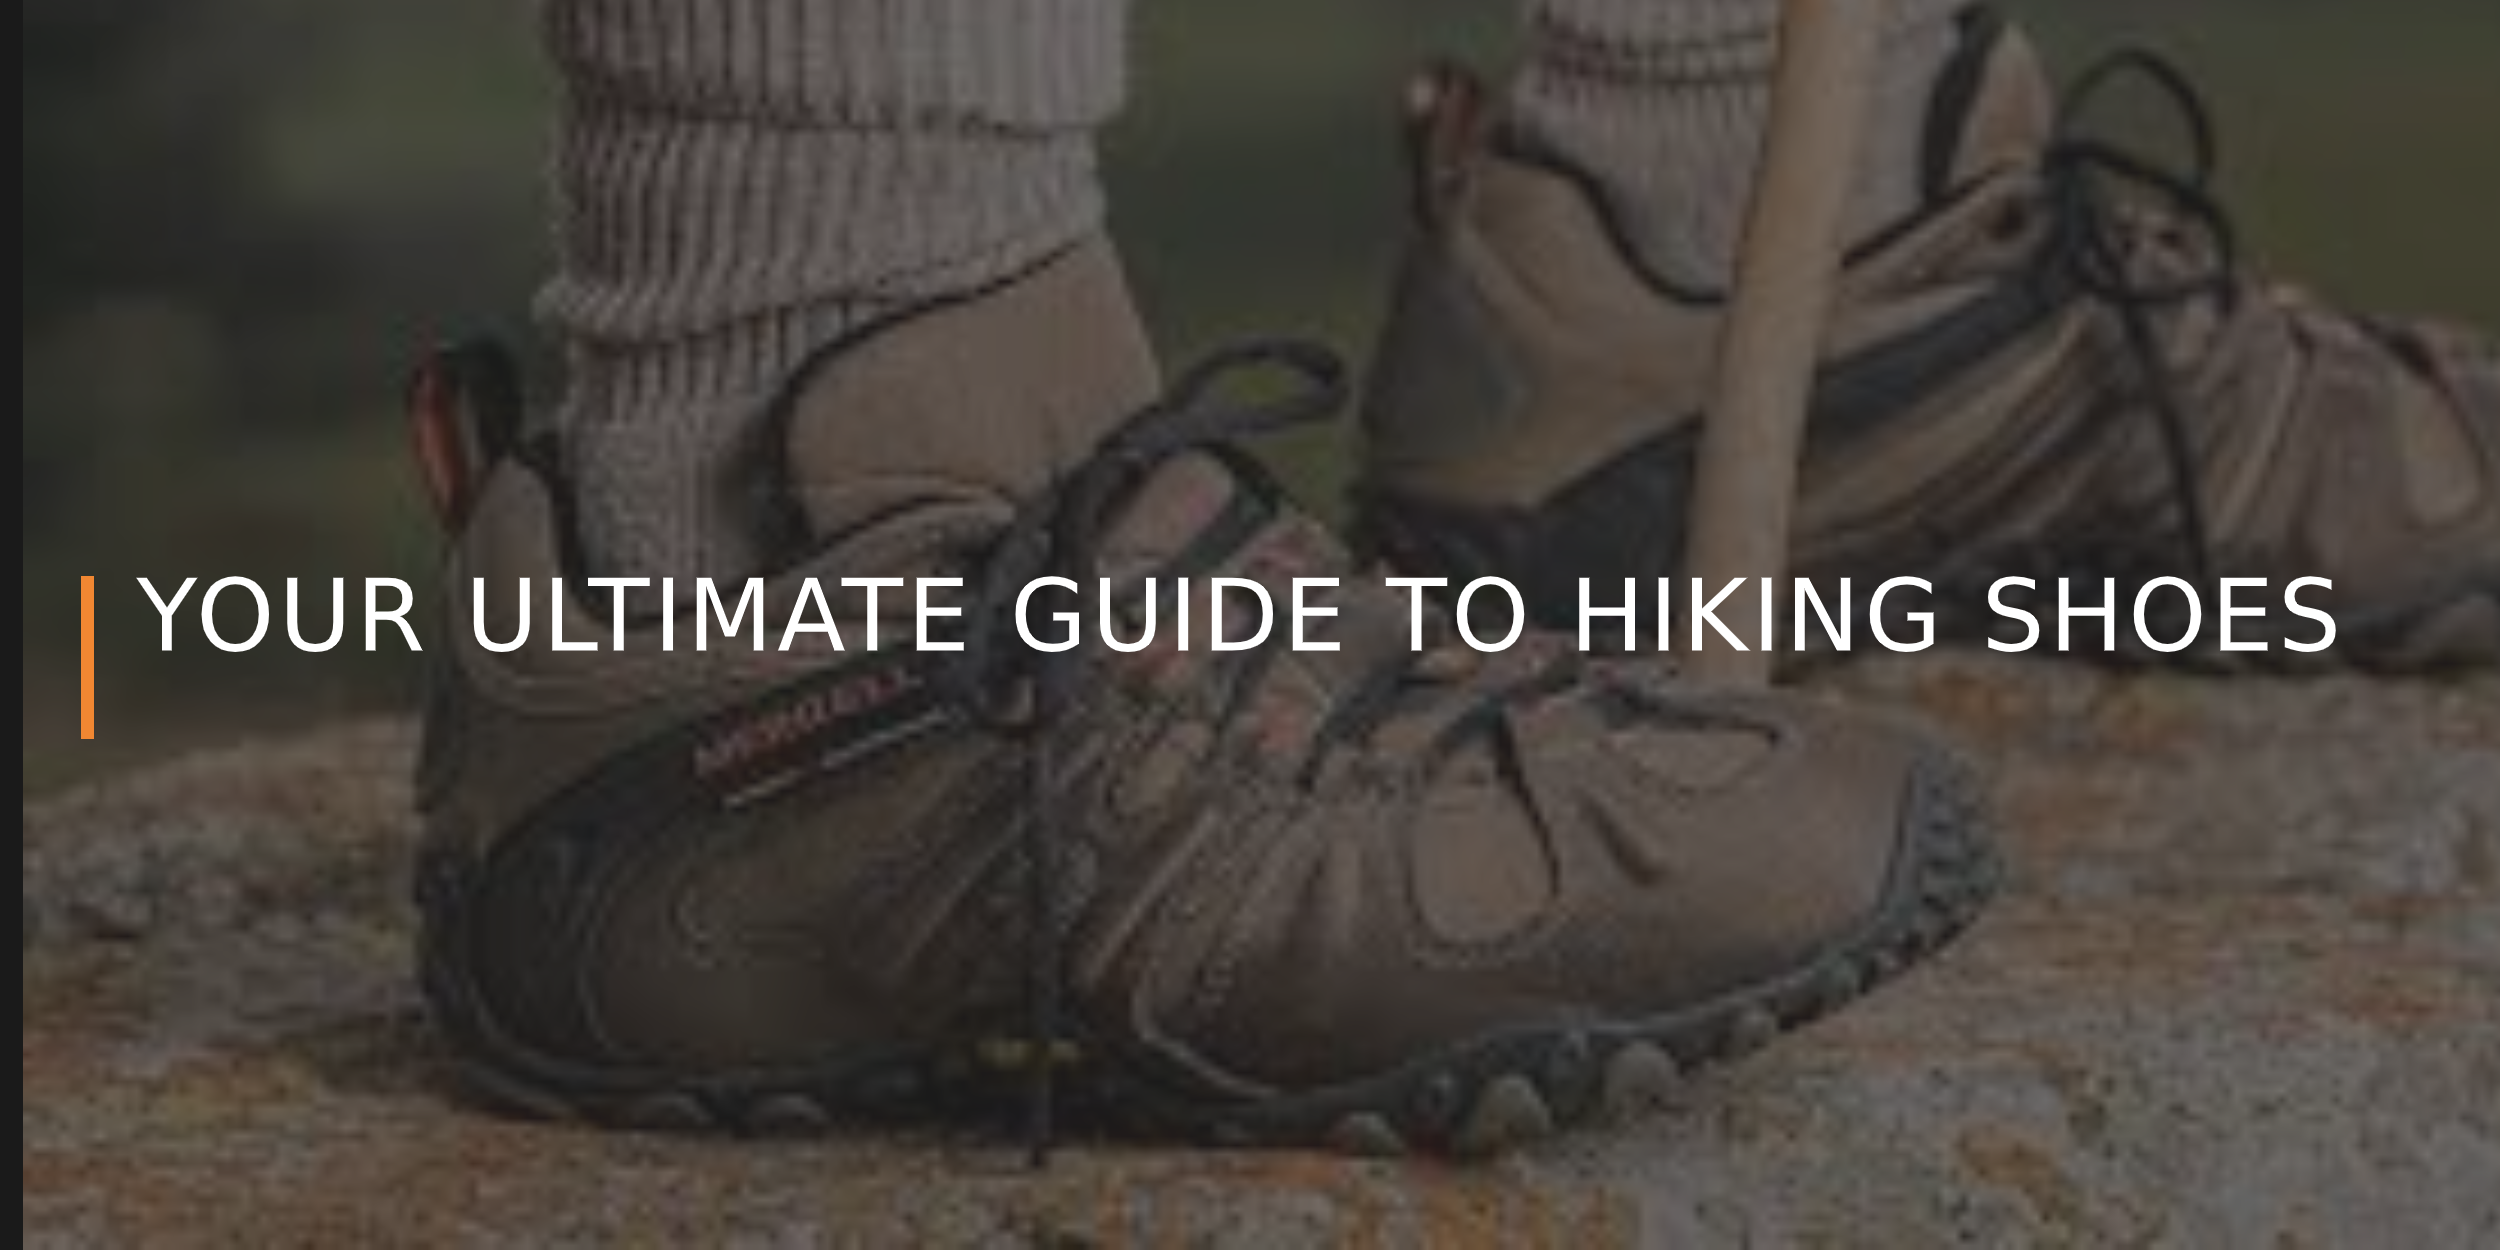 Your Ultimate Guide to Hiking Shoes